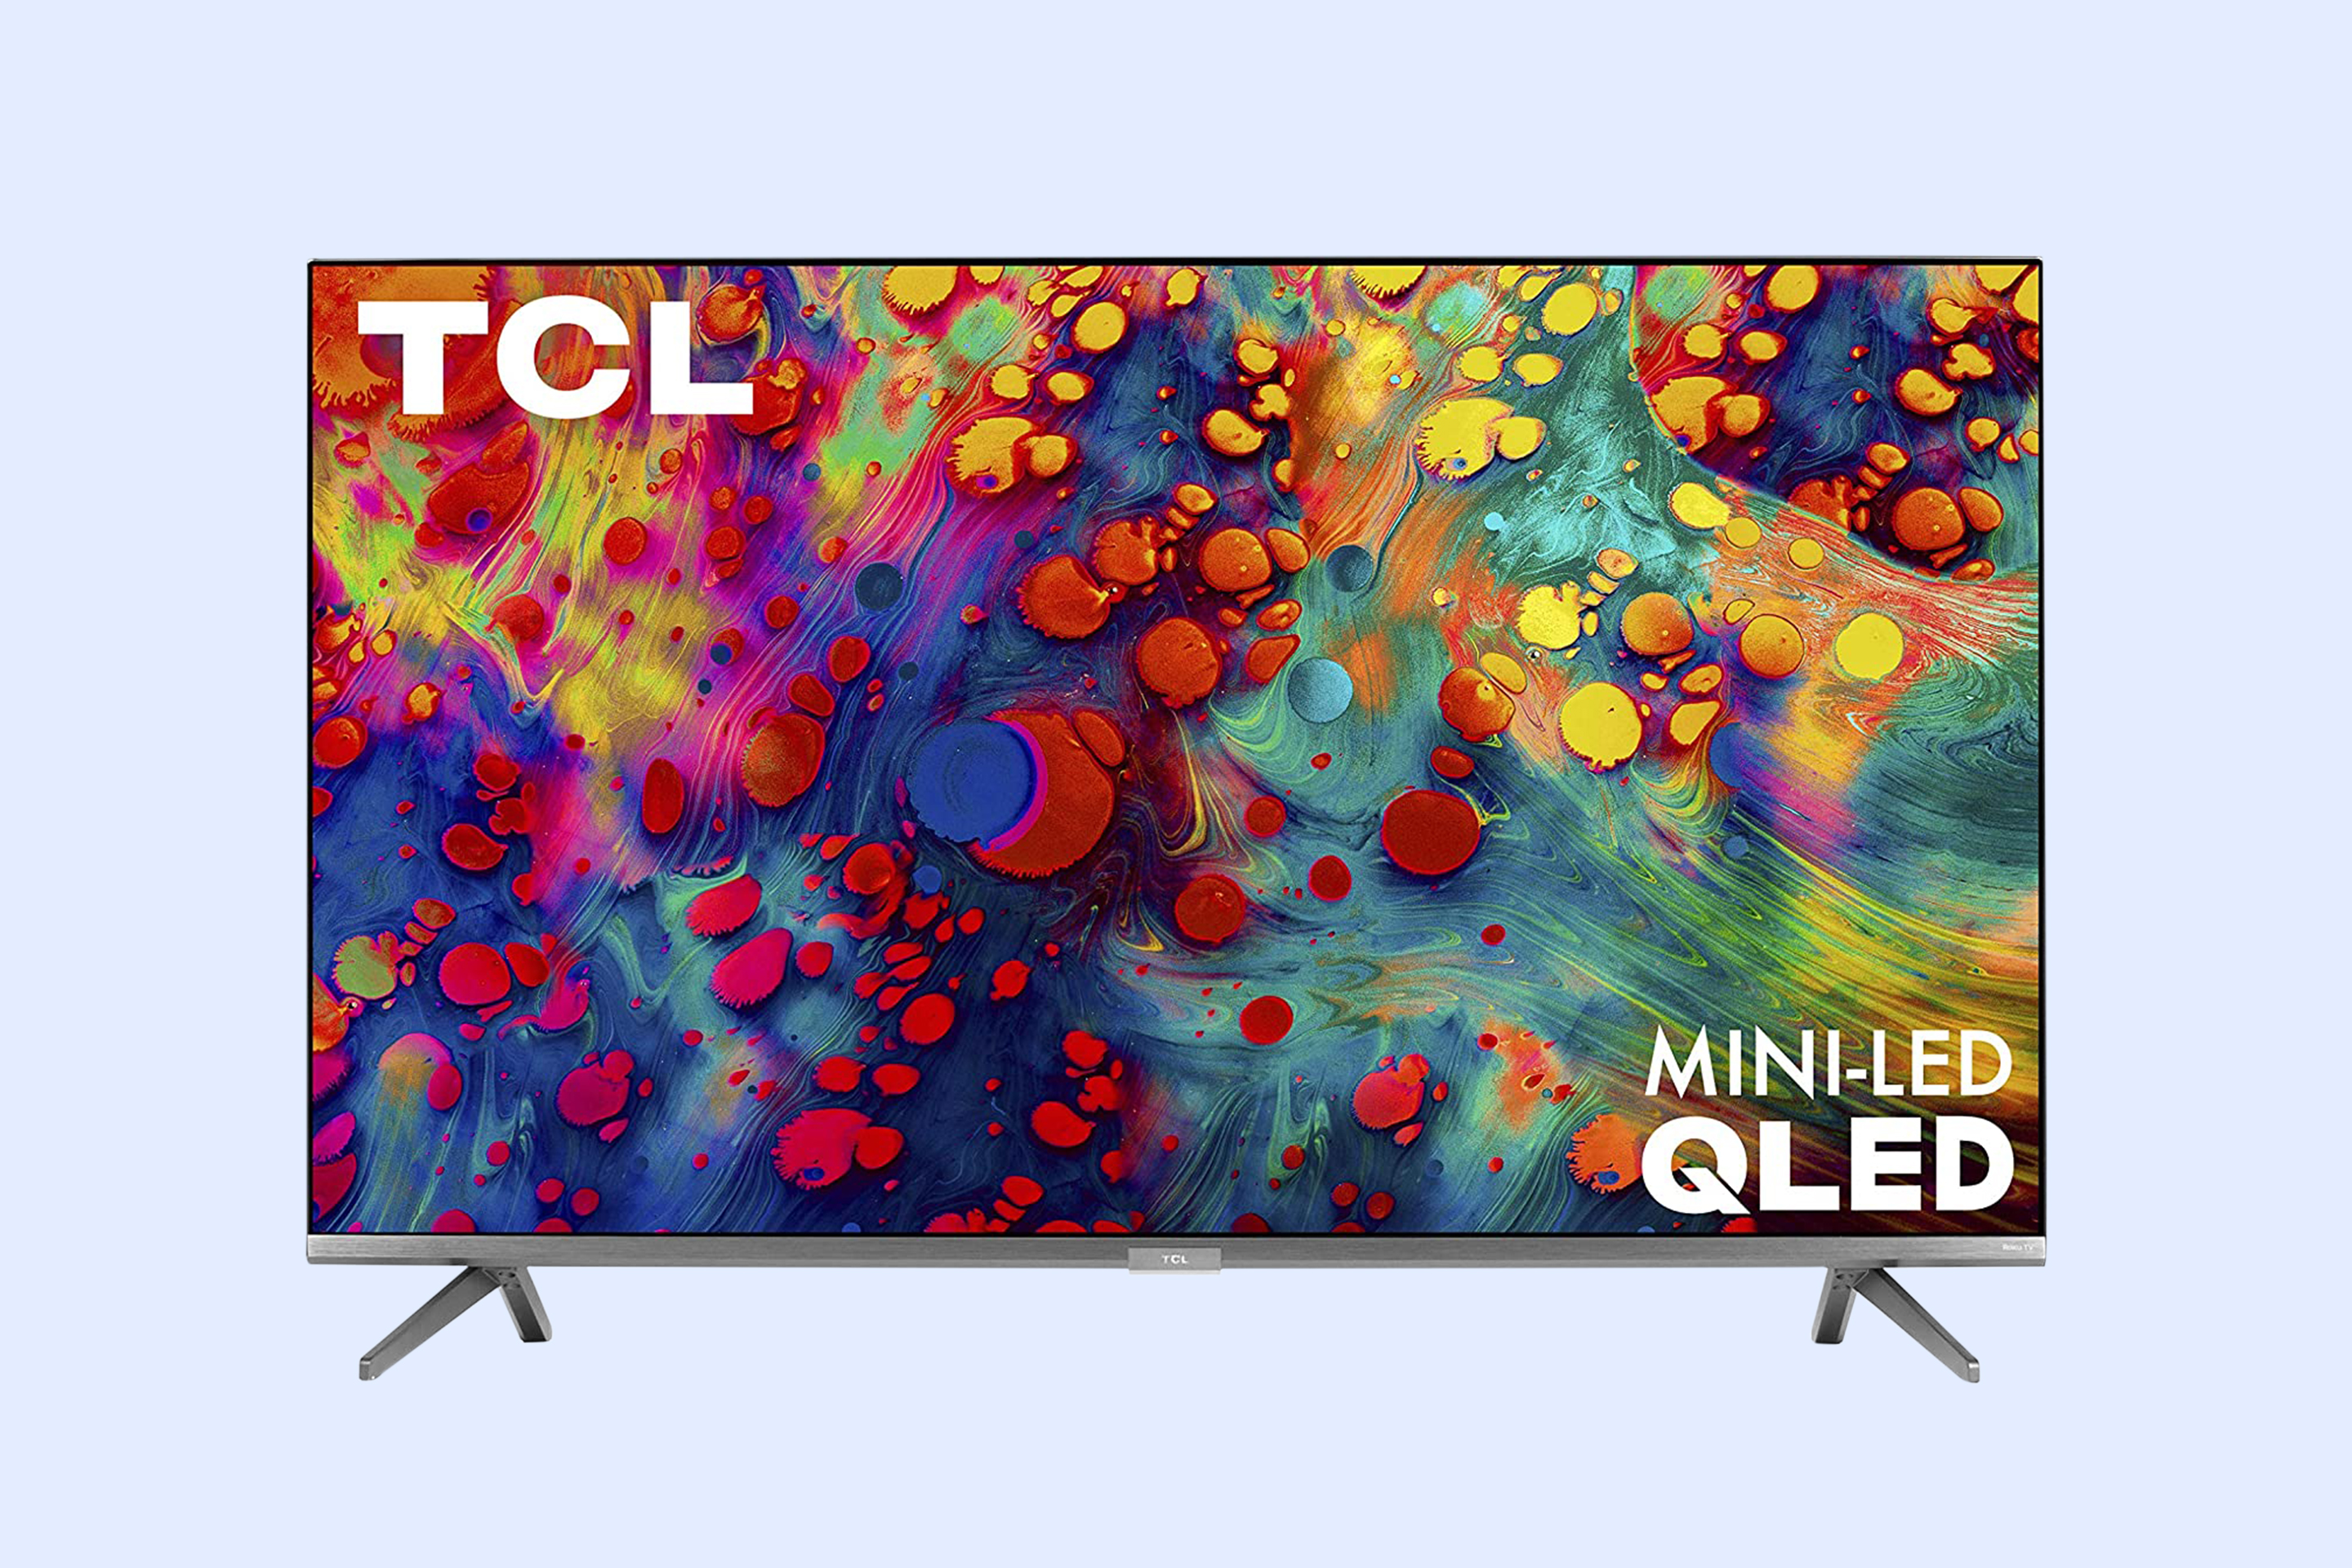 TCL Smart TV with Mini LED QLED Properties and Abstract Art on Screen